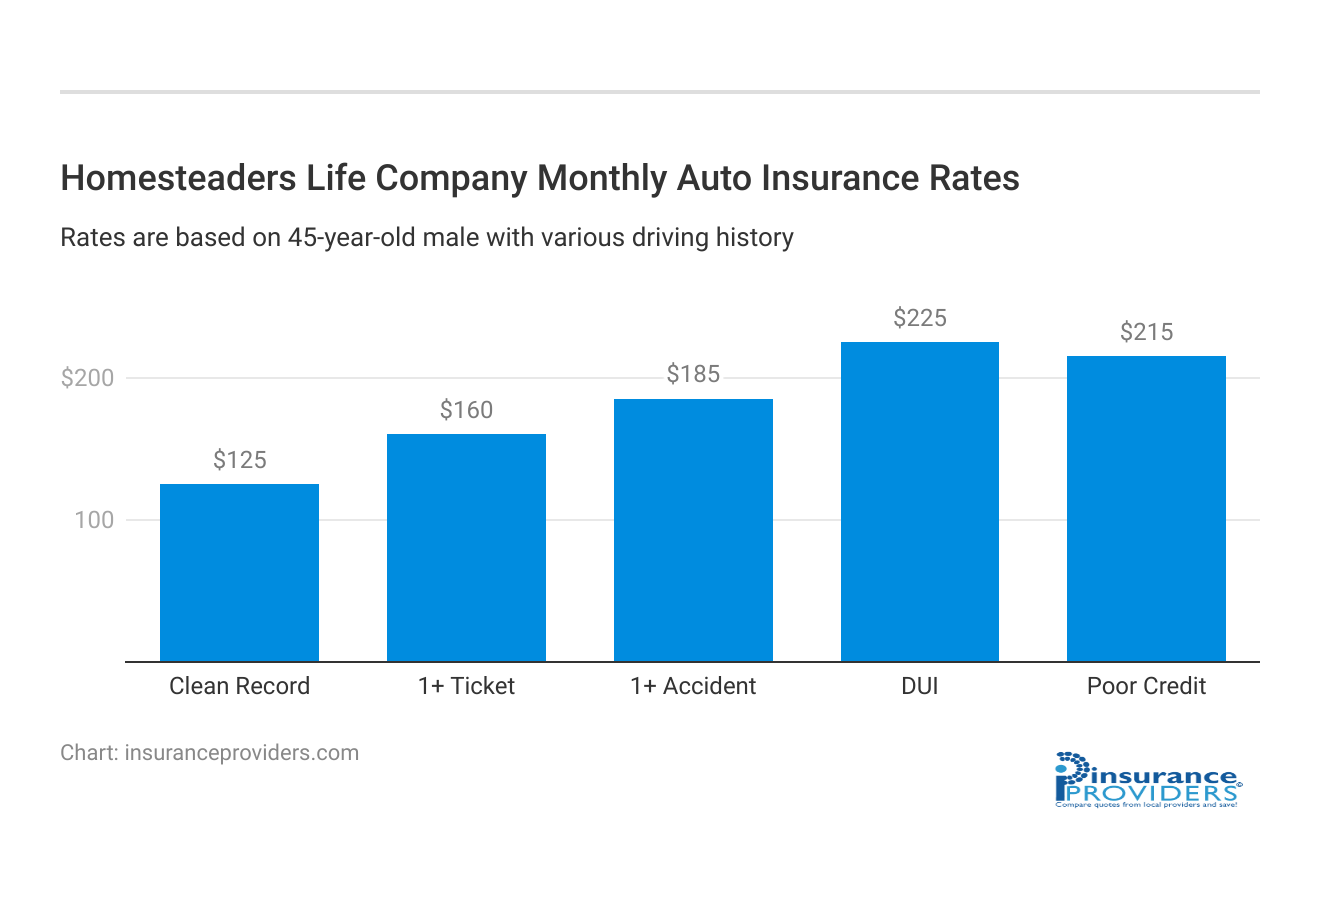 <h3>Homesteaders Life Company Monthly Auto Insurance Rates</h3>